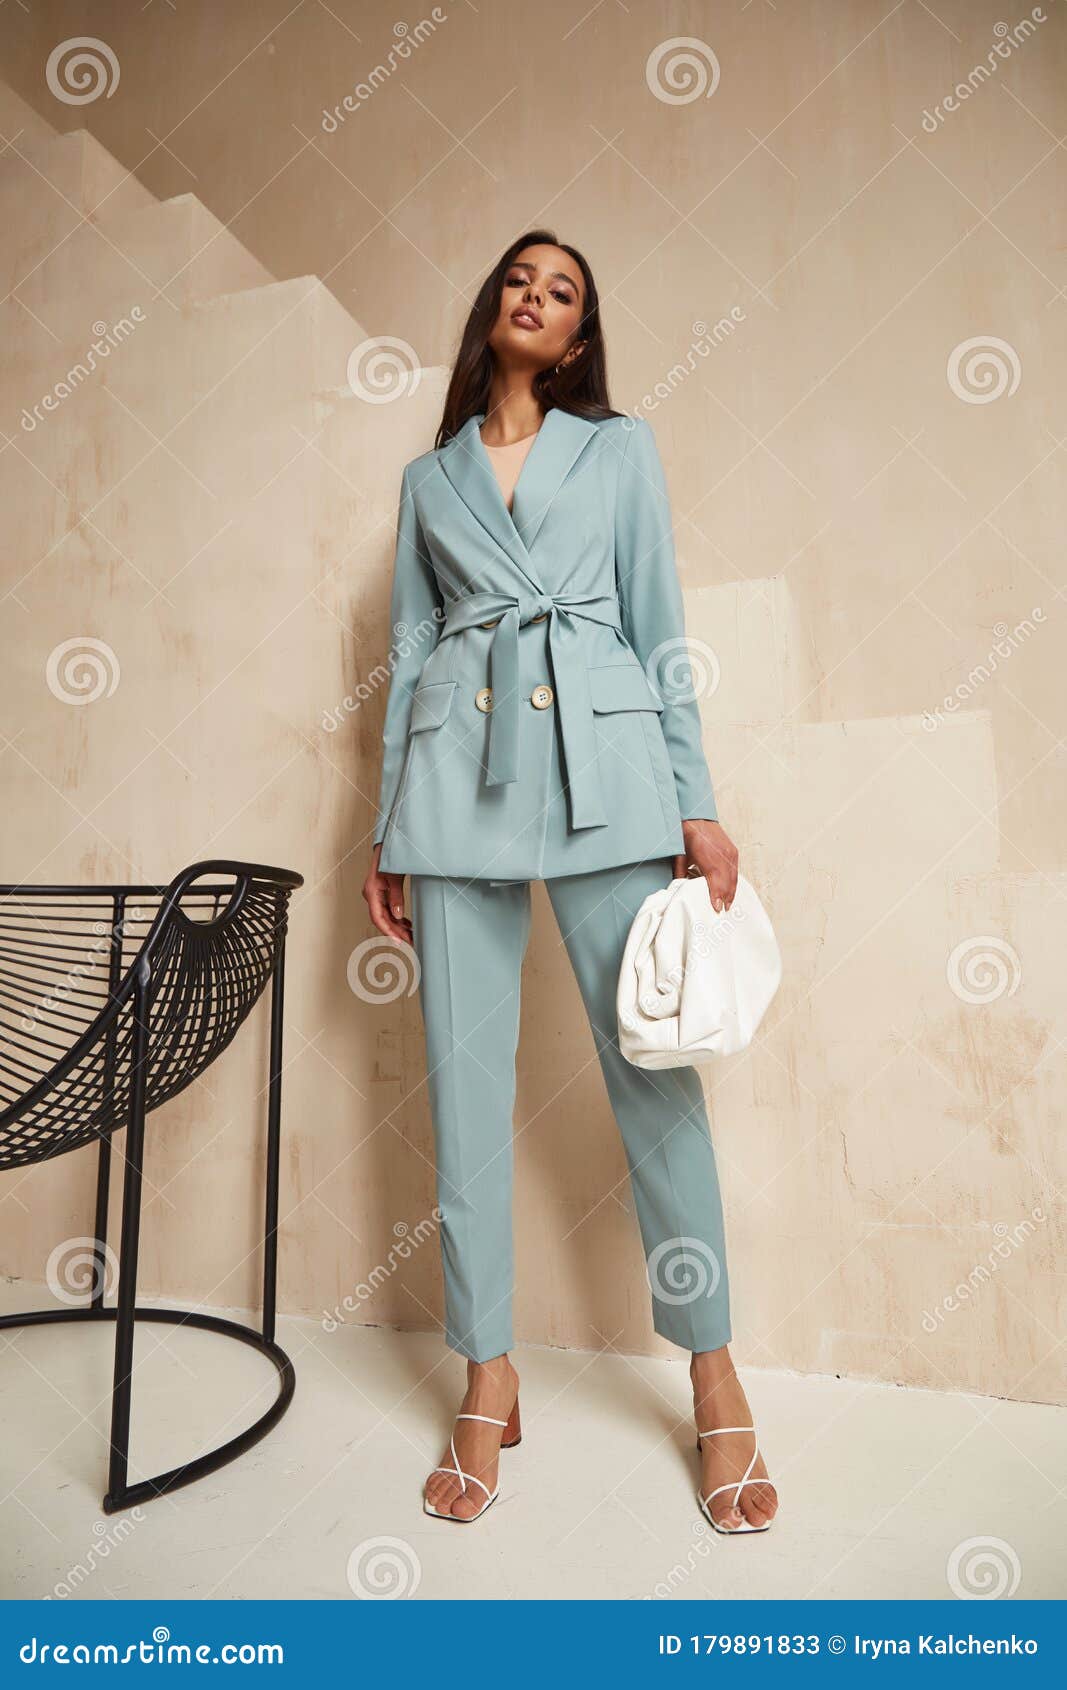 beautiful brunette woman natural make up wear fashion clothes casual dress code office style blue jacket pants suit 179891833